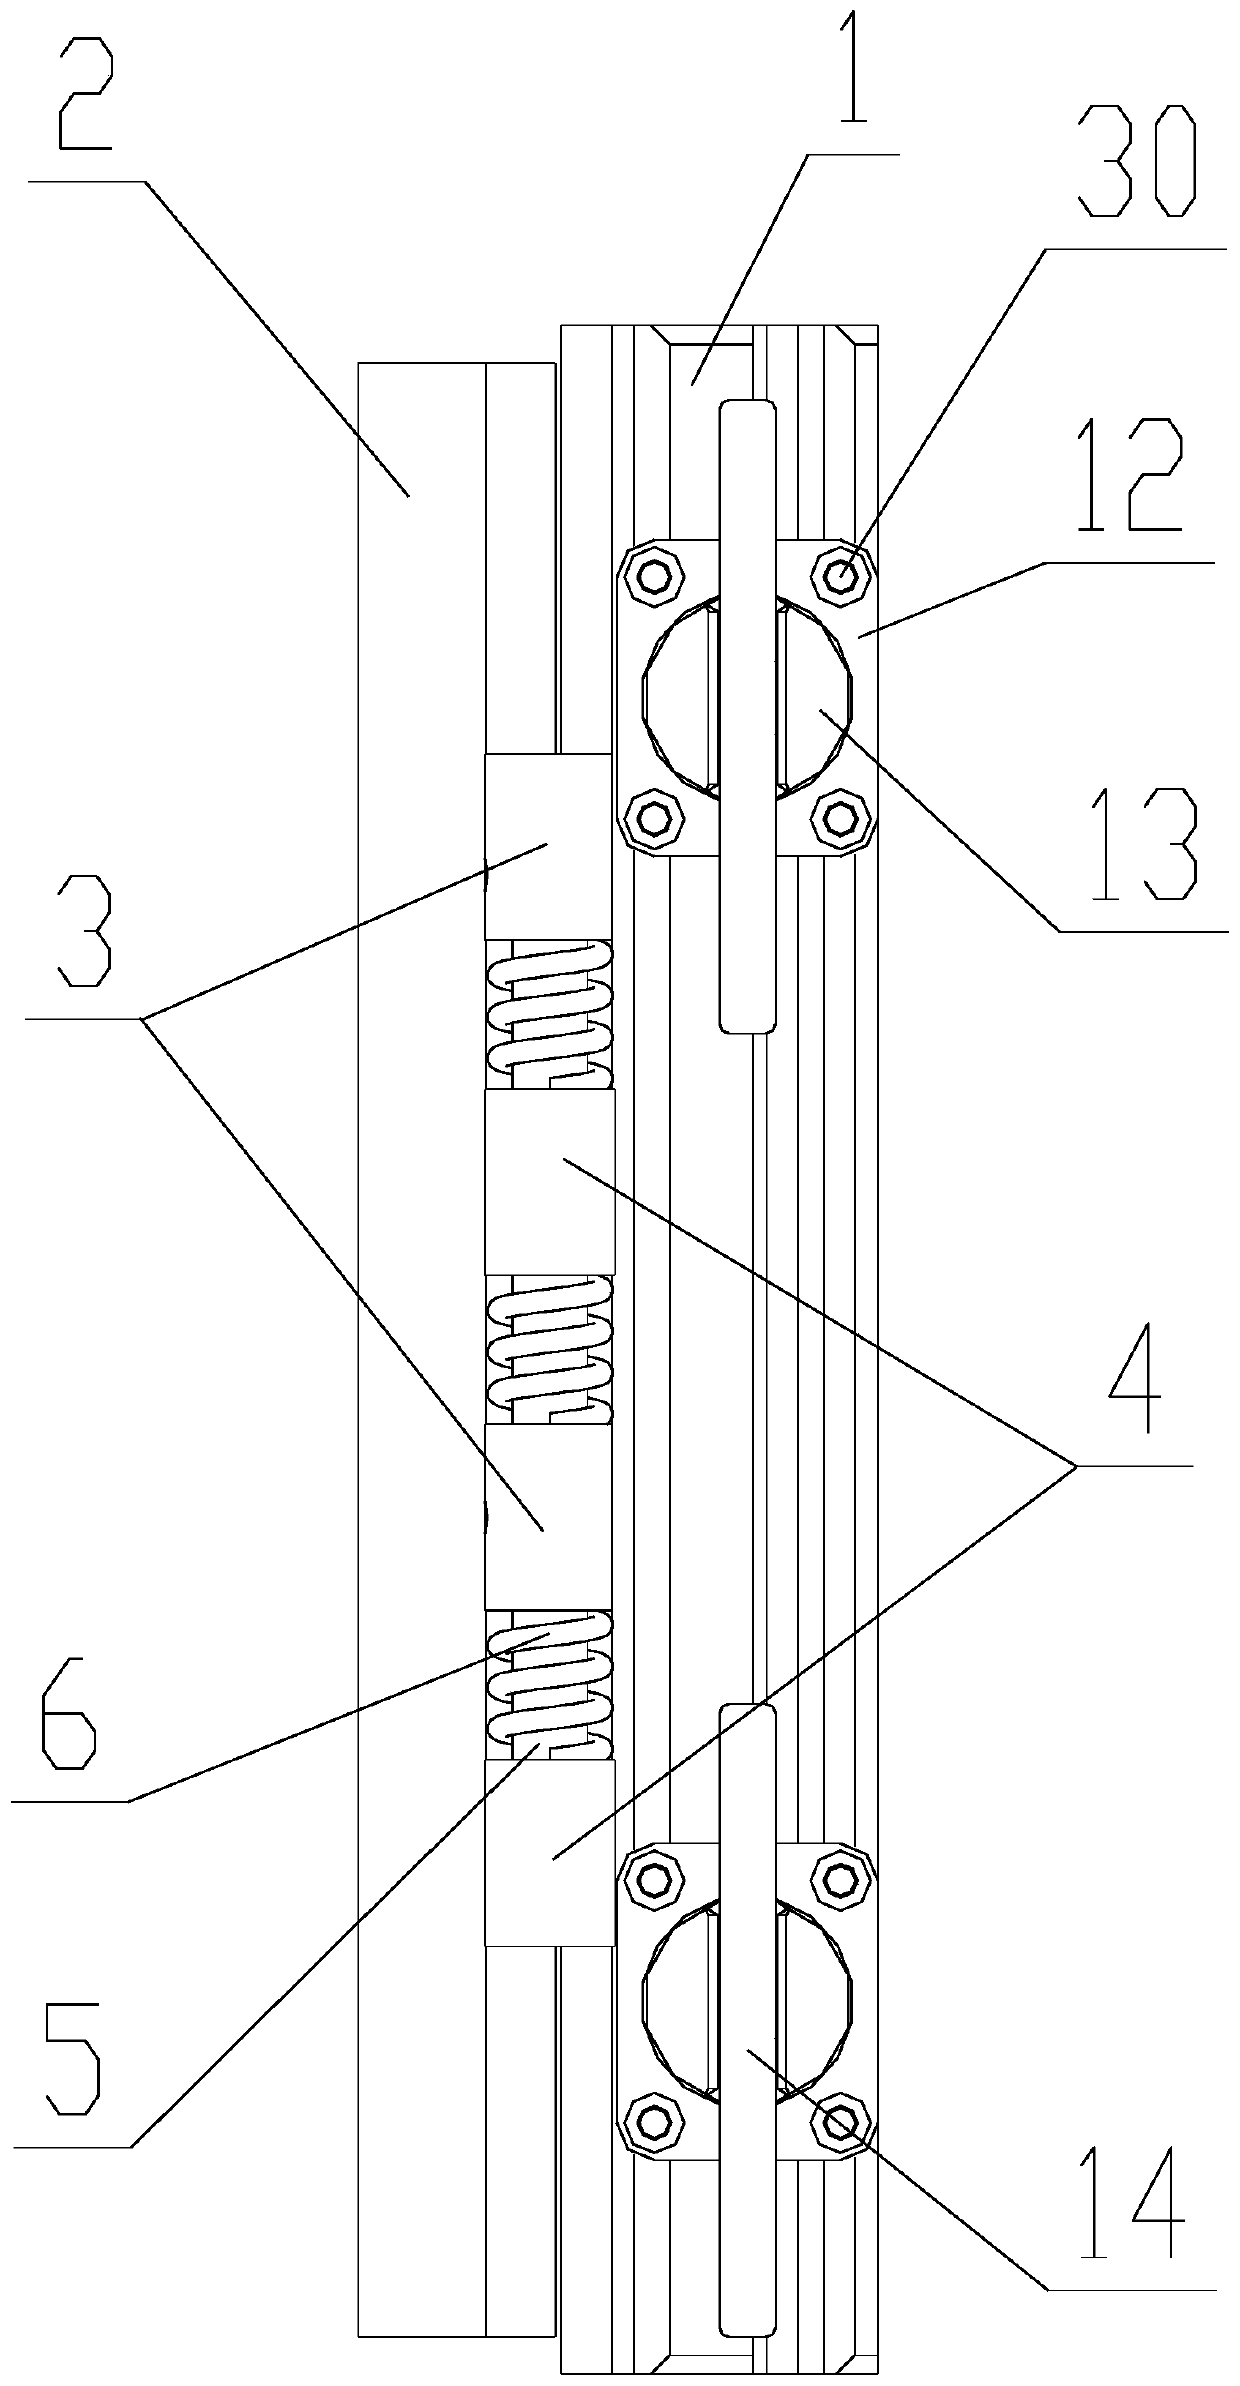 Spring damping mechanism with quick locking function